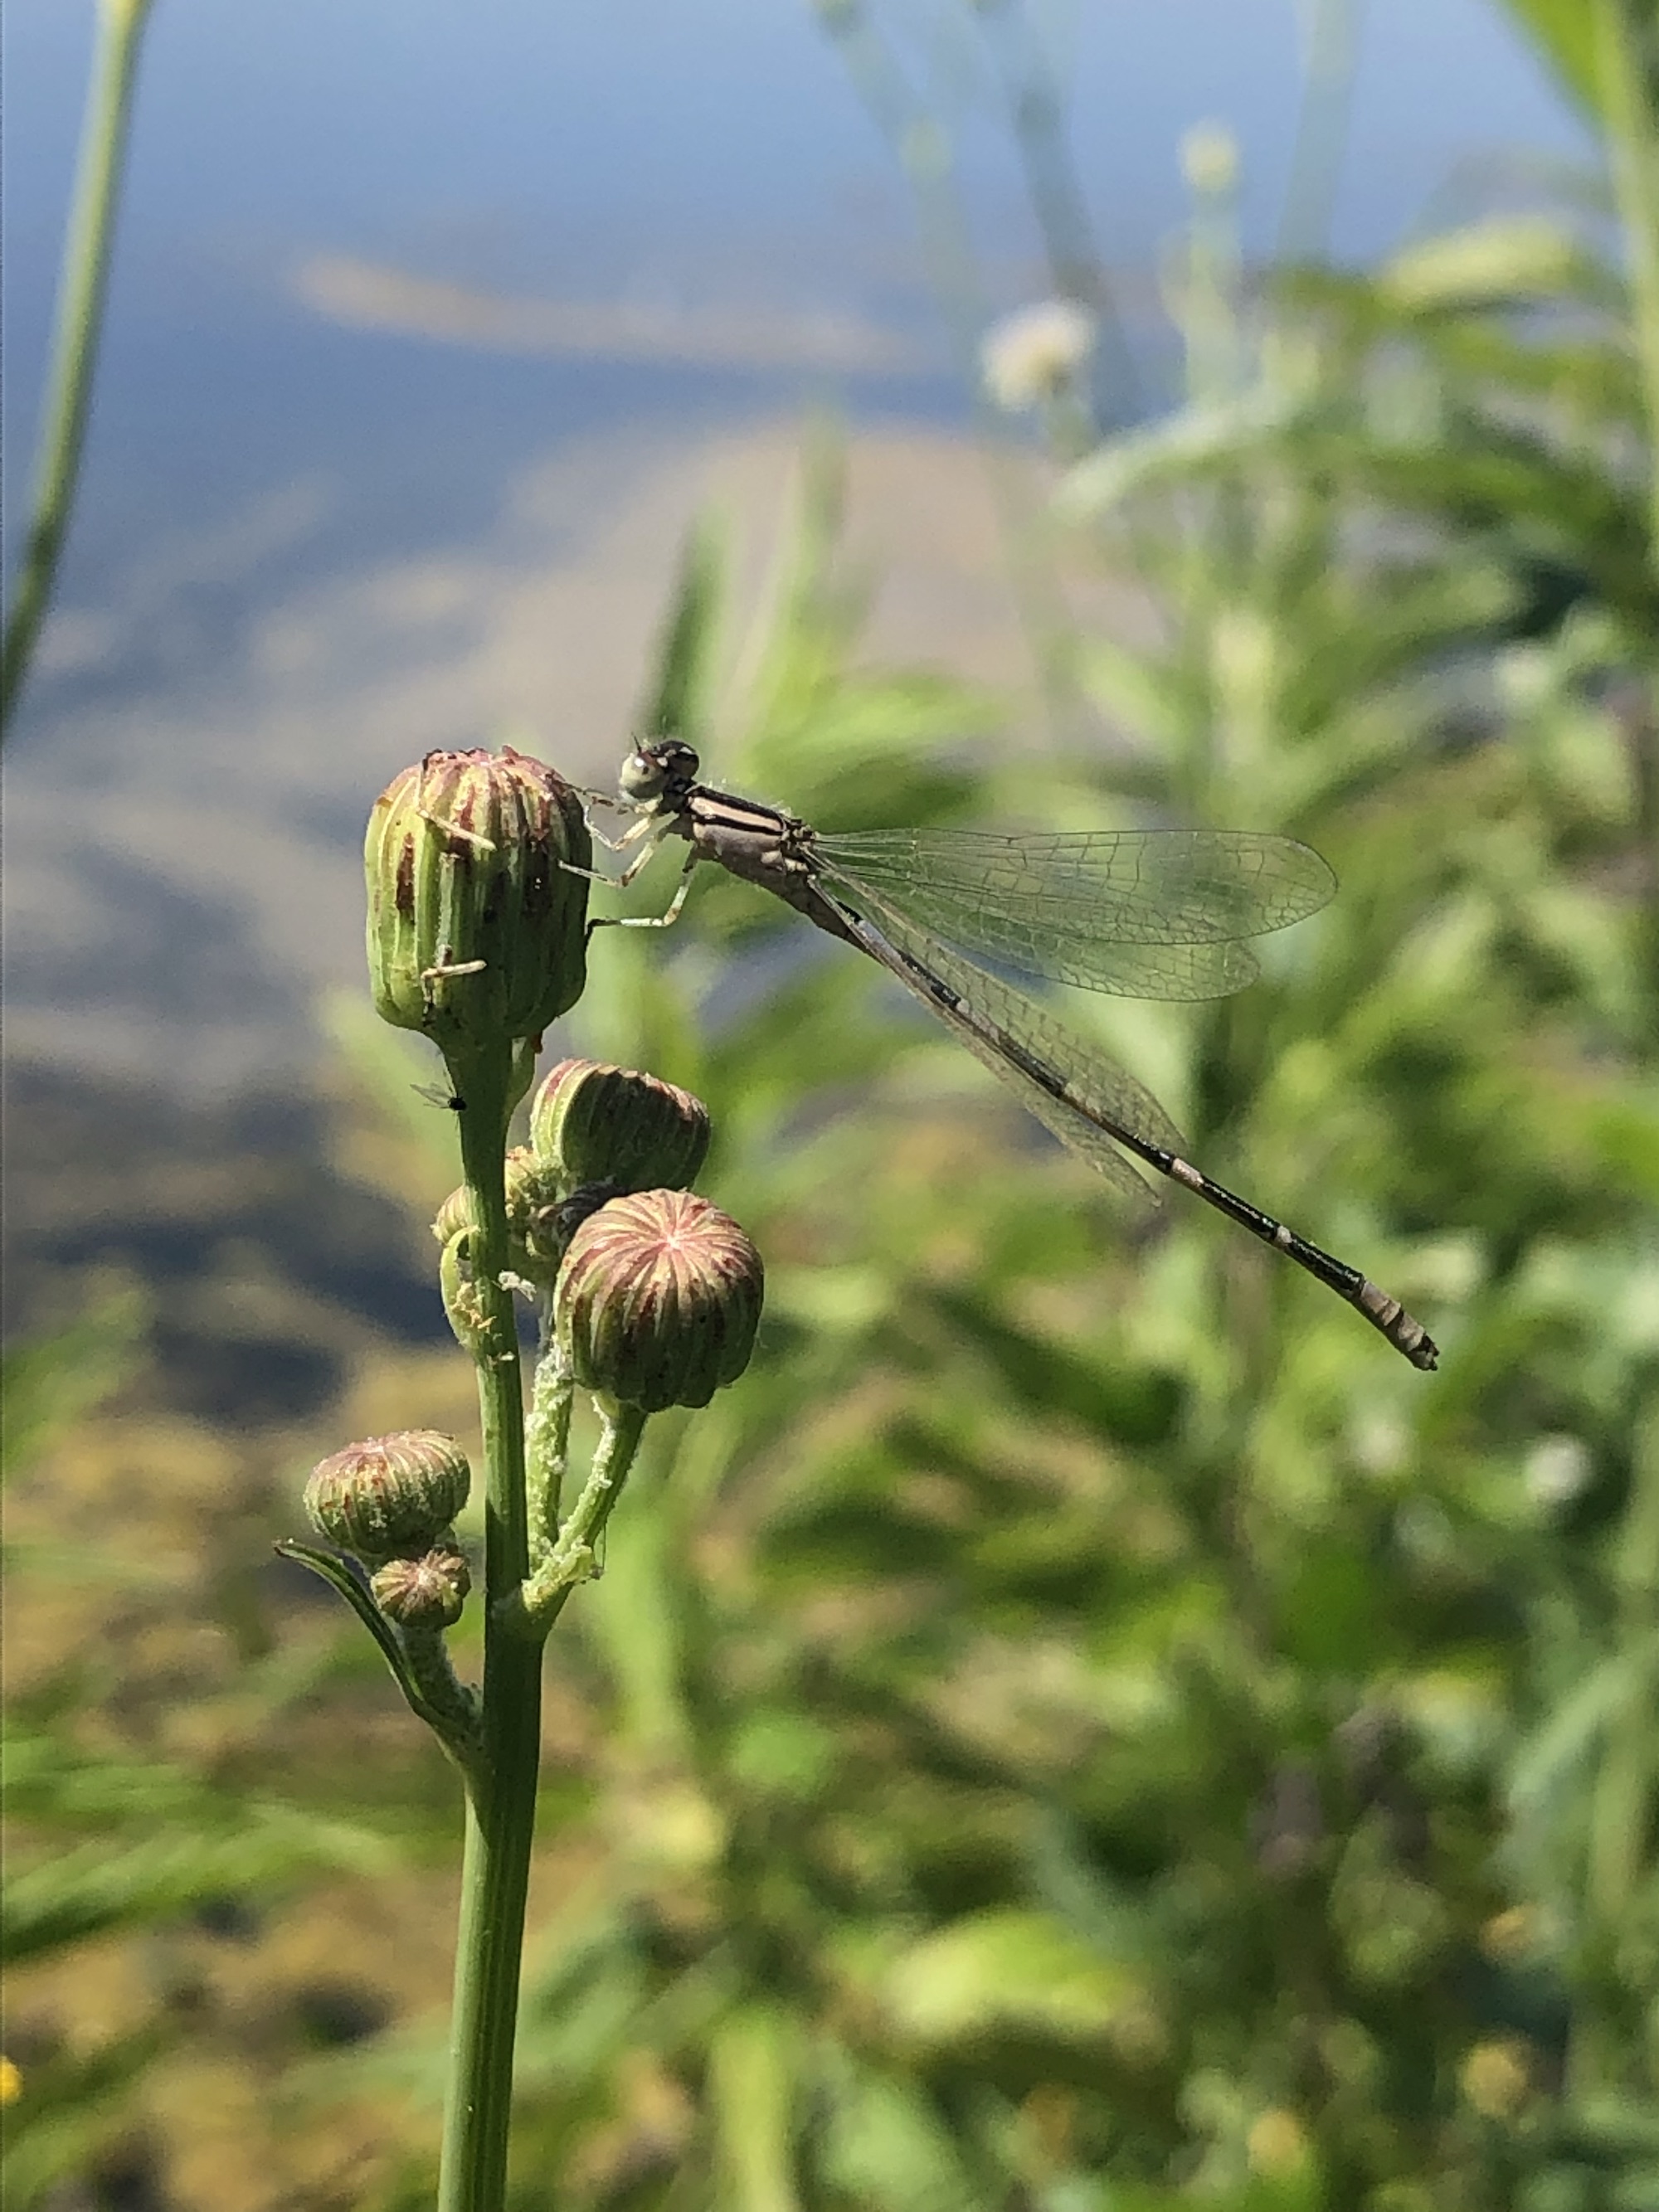 Dragonfly landing on Perennial Sowthistle along shore of Lake Wingra on July 14, 2022.